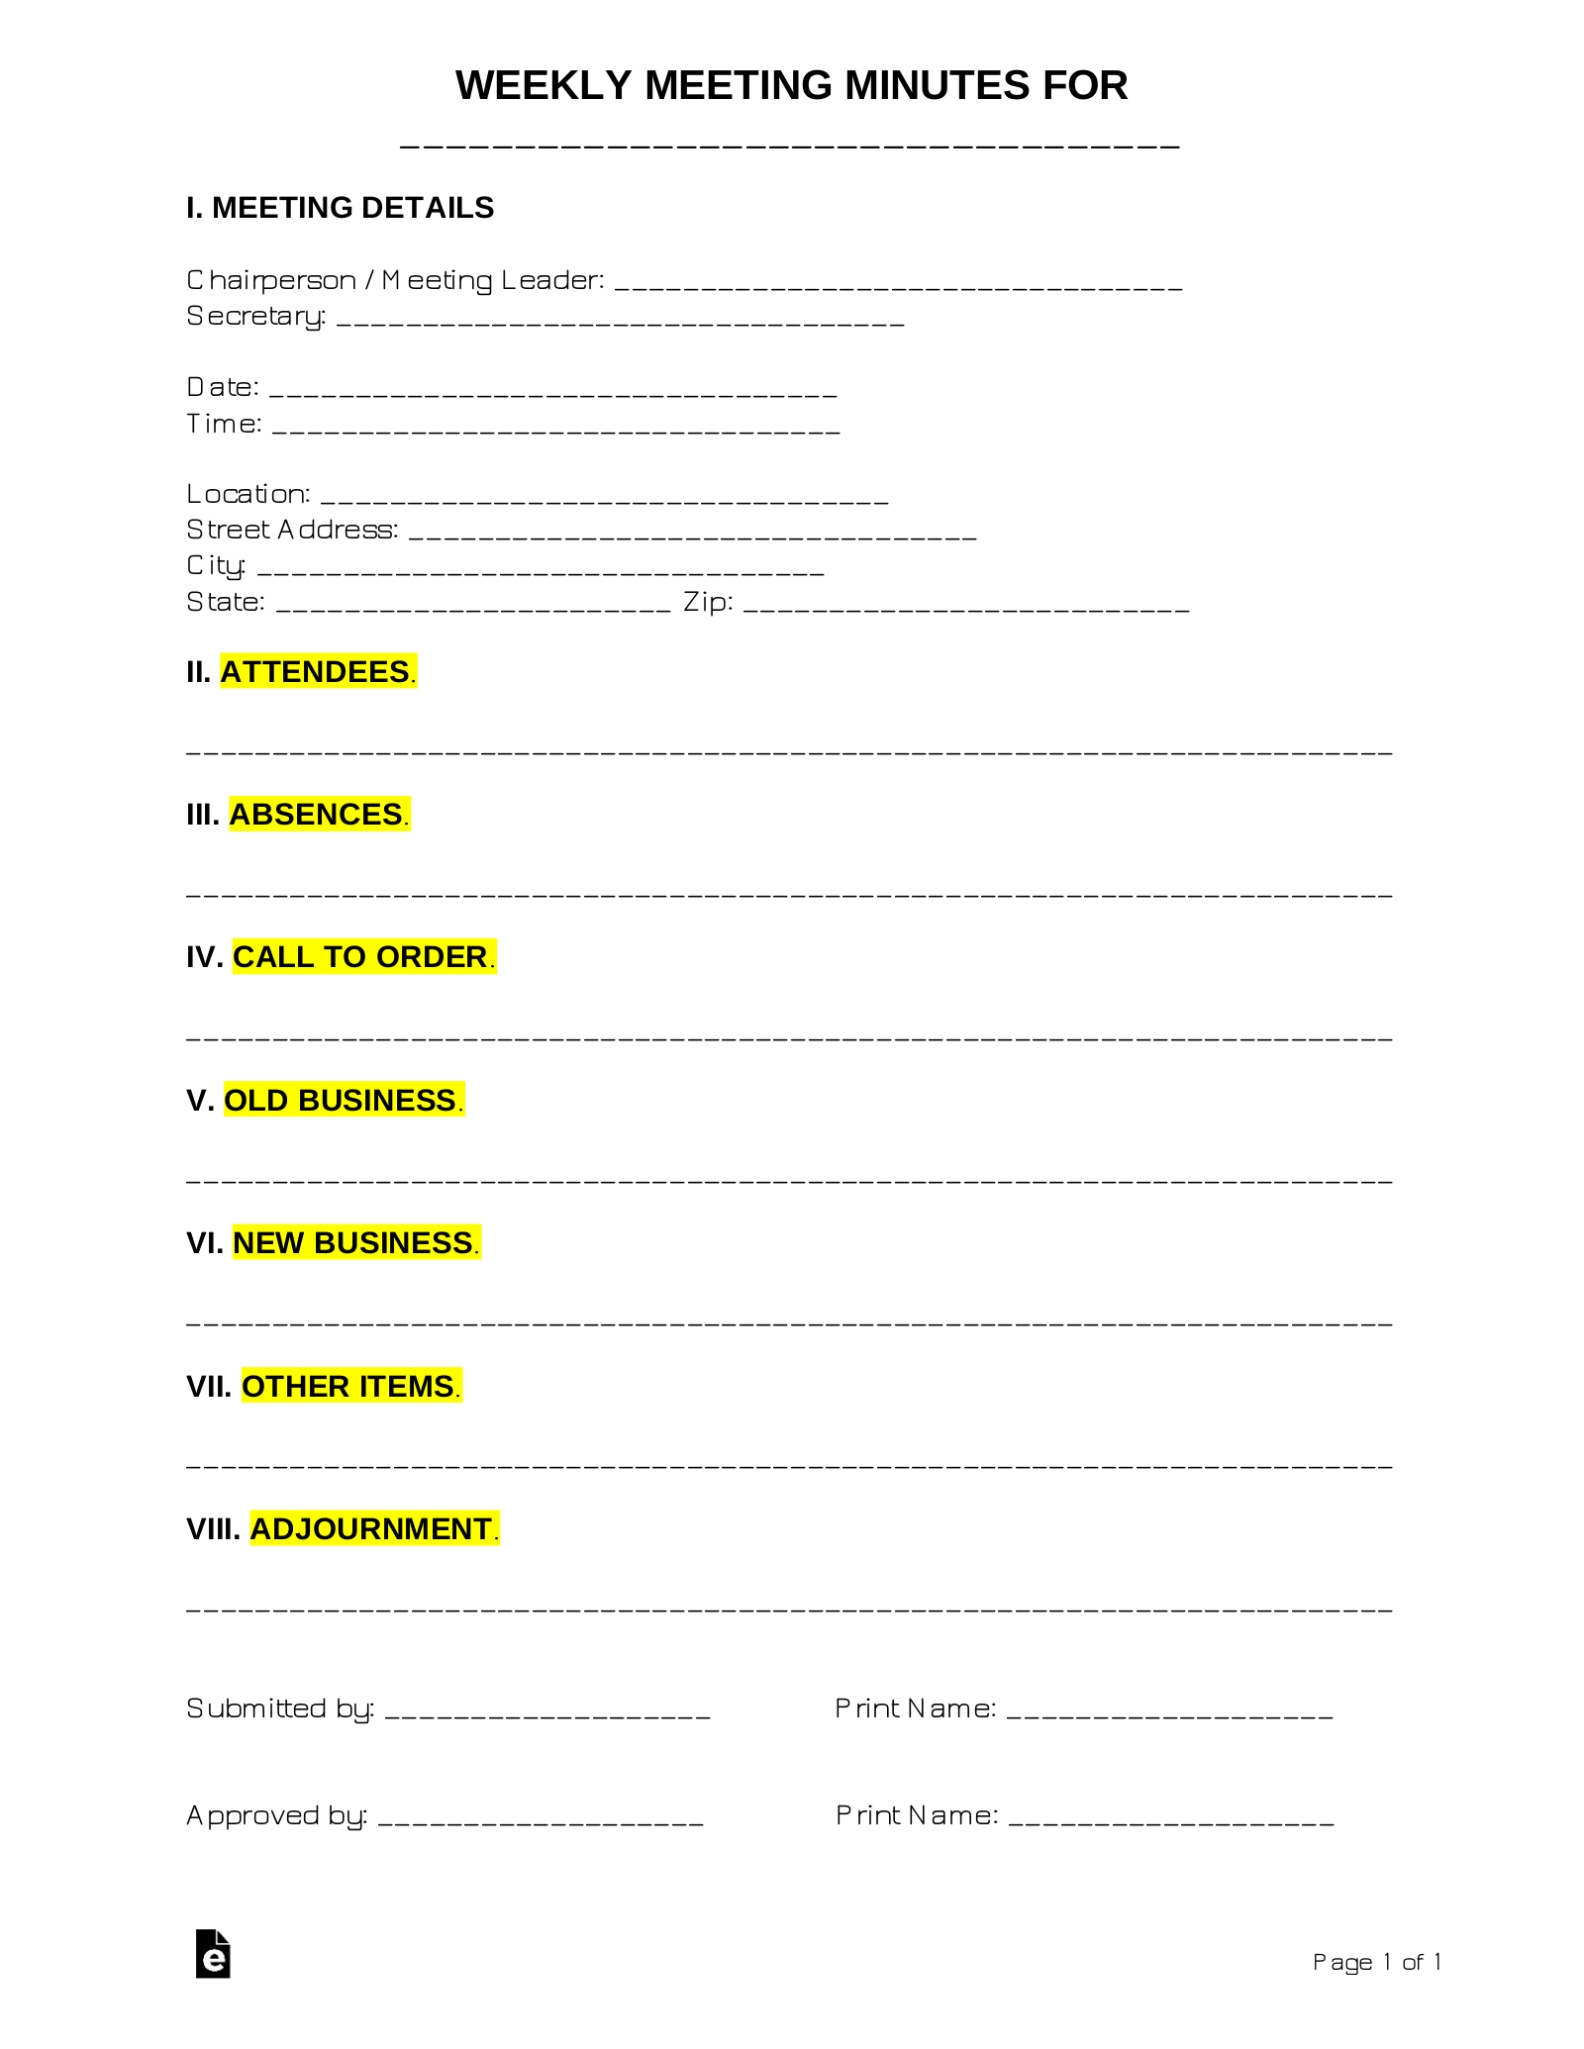 Free Weekly Meeting Minutes Template | Sample - Pdf | Word - Eforms In Meeting Notes Format Template